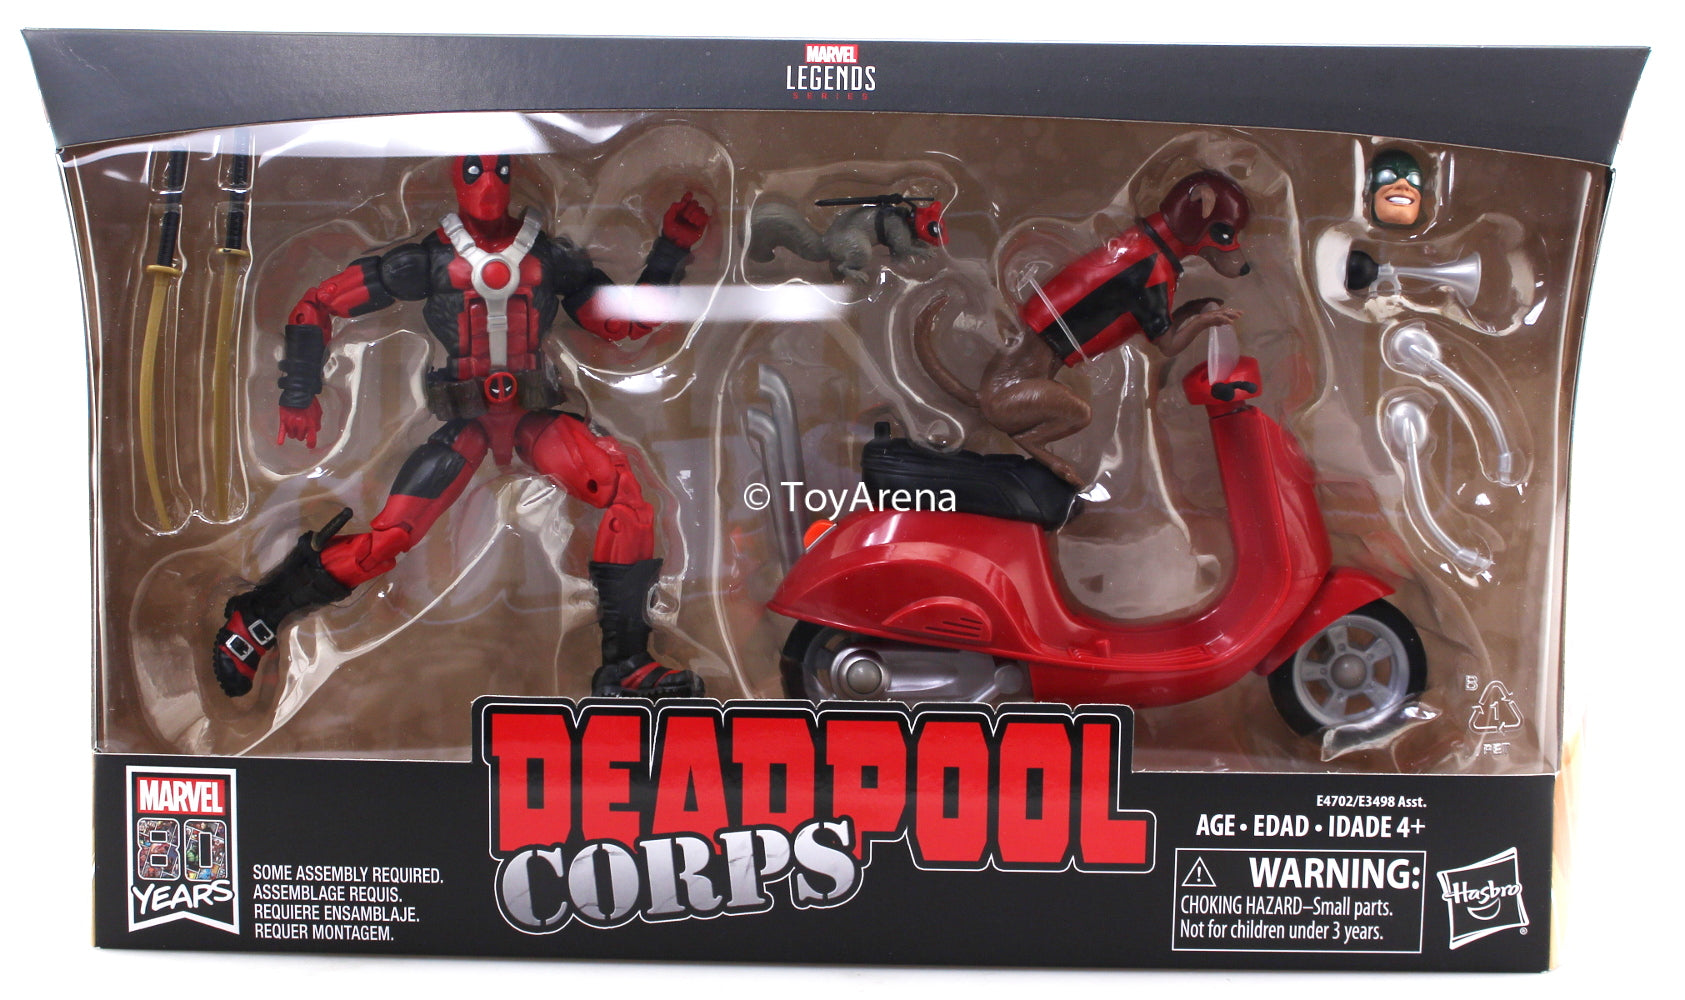 Ultimate Marvel Legends Deadpool Corps Legends Series 6-inch Action Figure - Deadpool with Bike Scooter